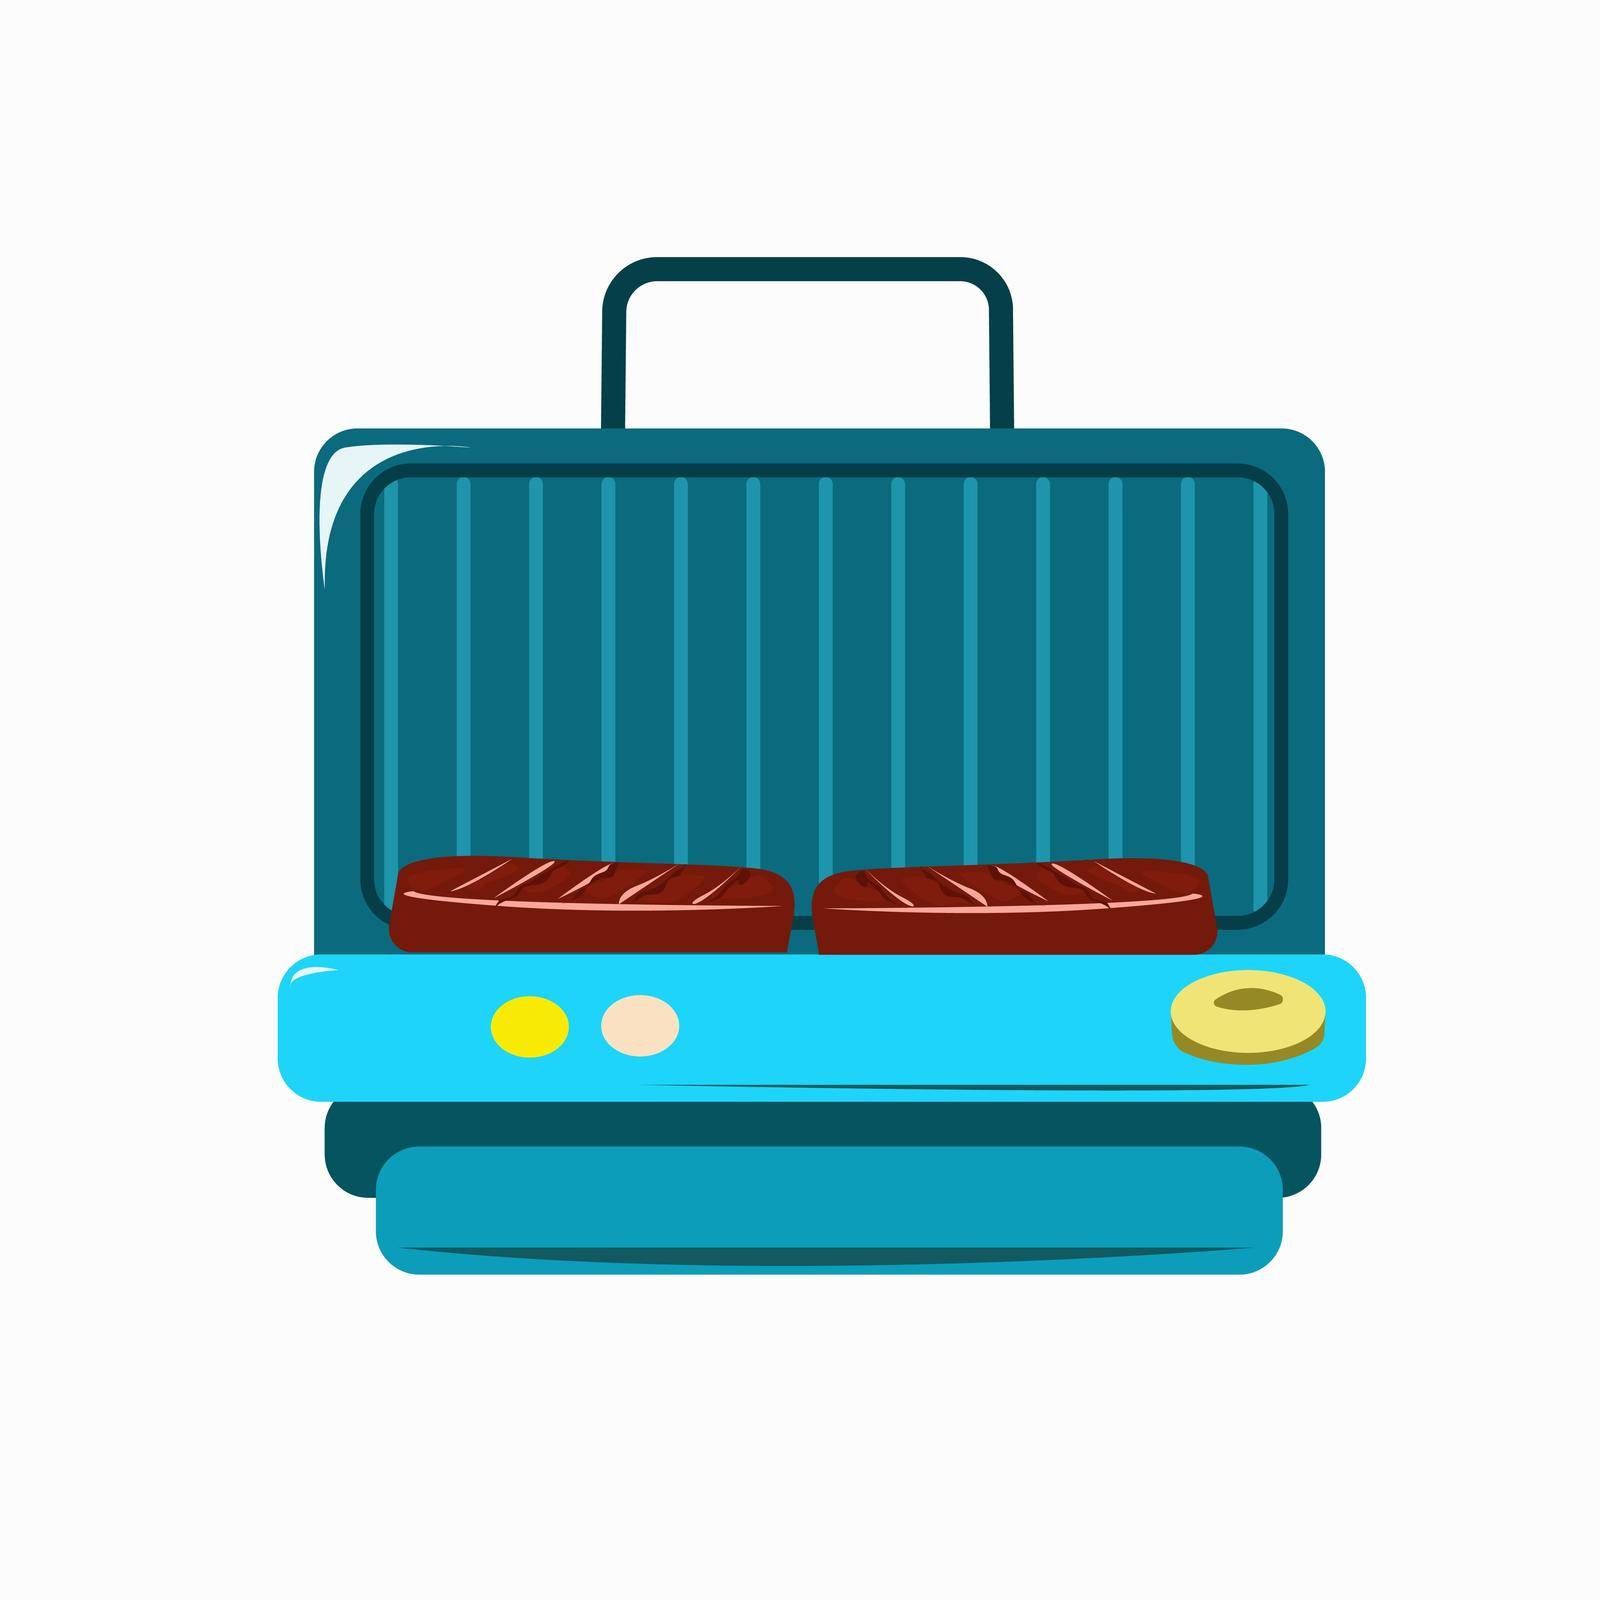 Kitchen grill for cooking meat and vegetables on the grill by EvgeniyaEgorova